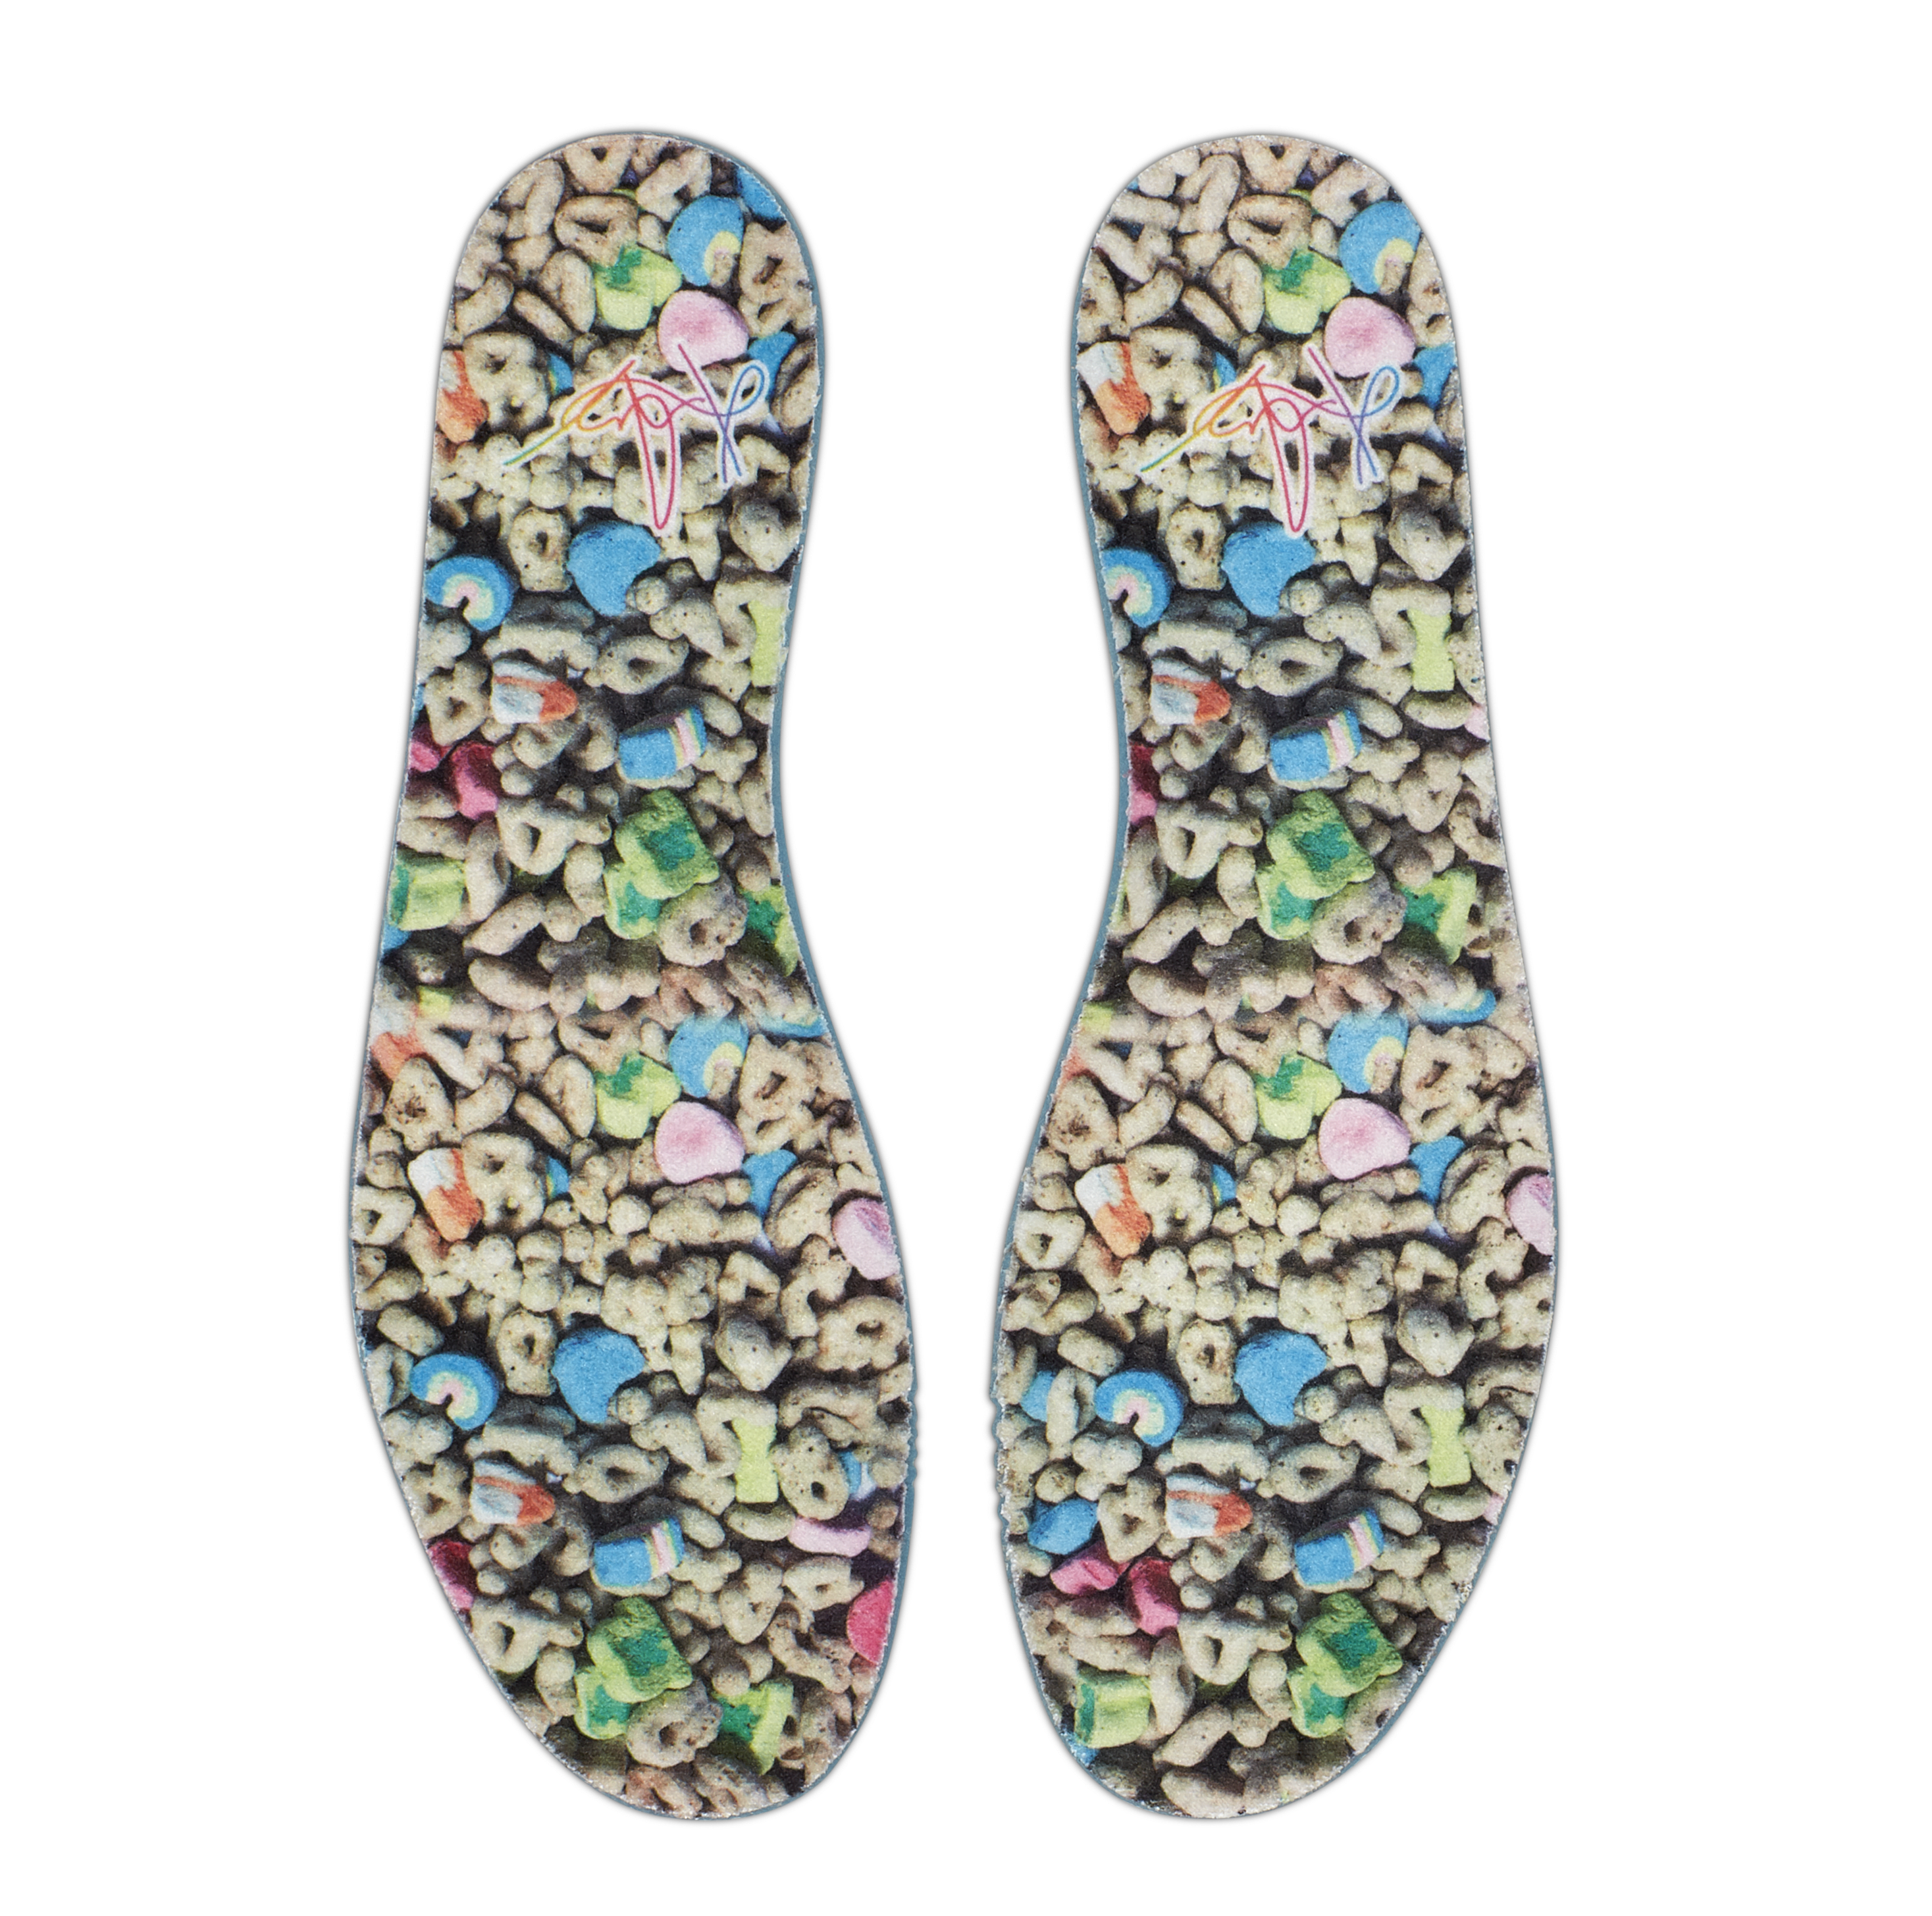 lucky charms shoes foot locker